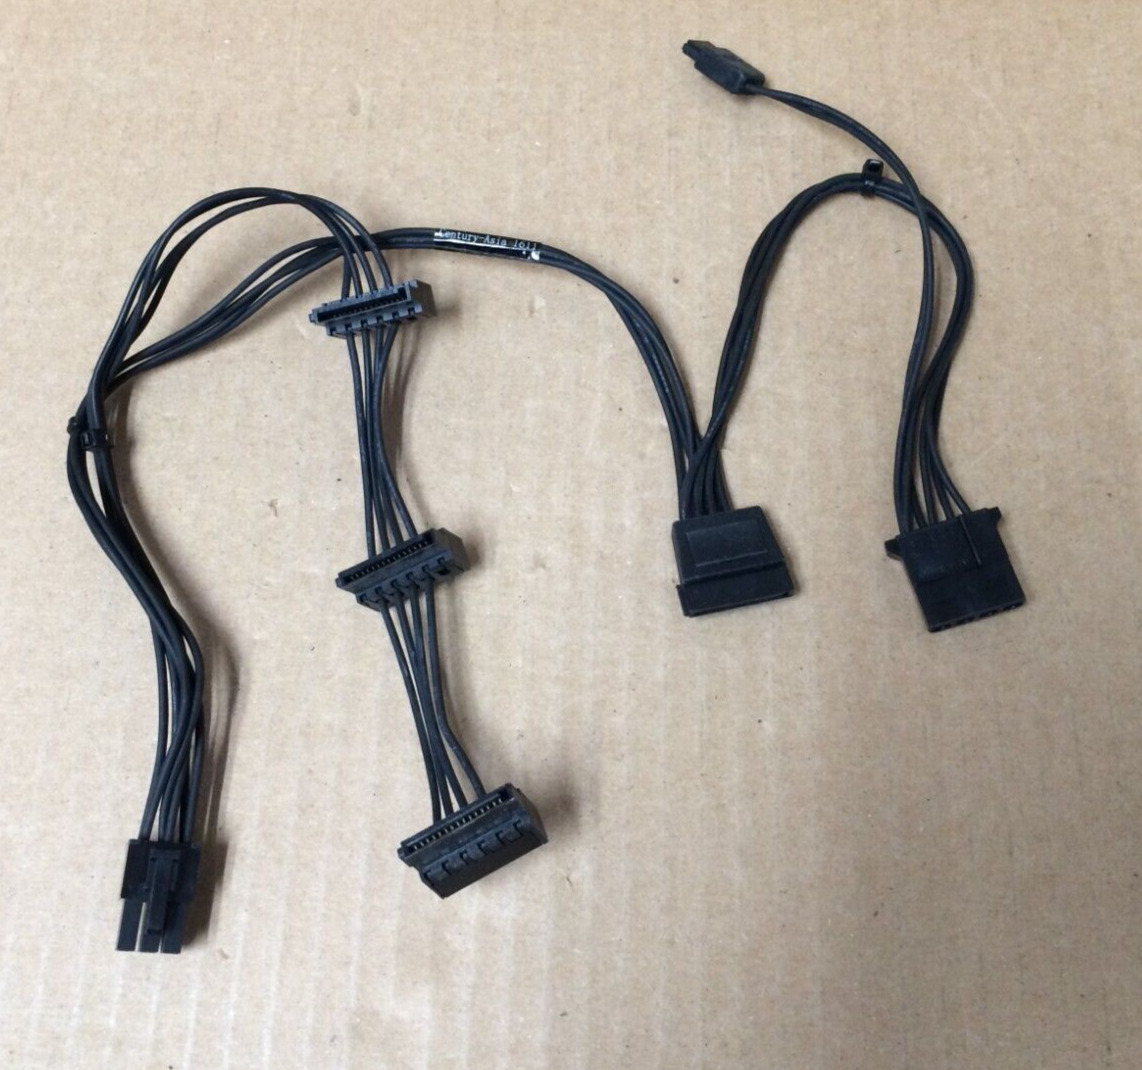 Genuine OEM HP 820930-001 HP Z240 Workstation SATA Power Cable Quick Ship